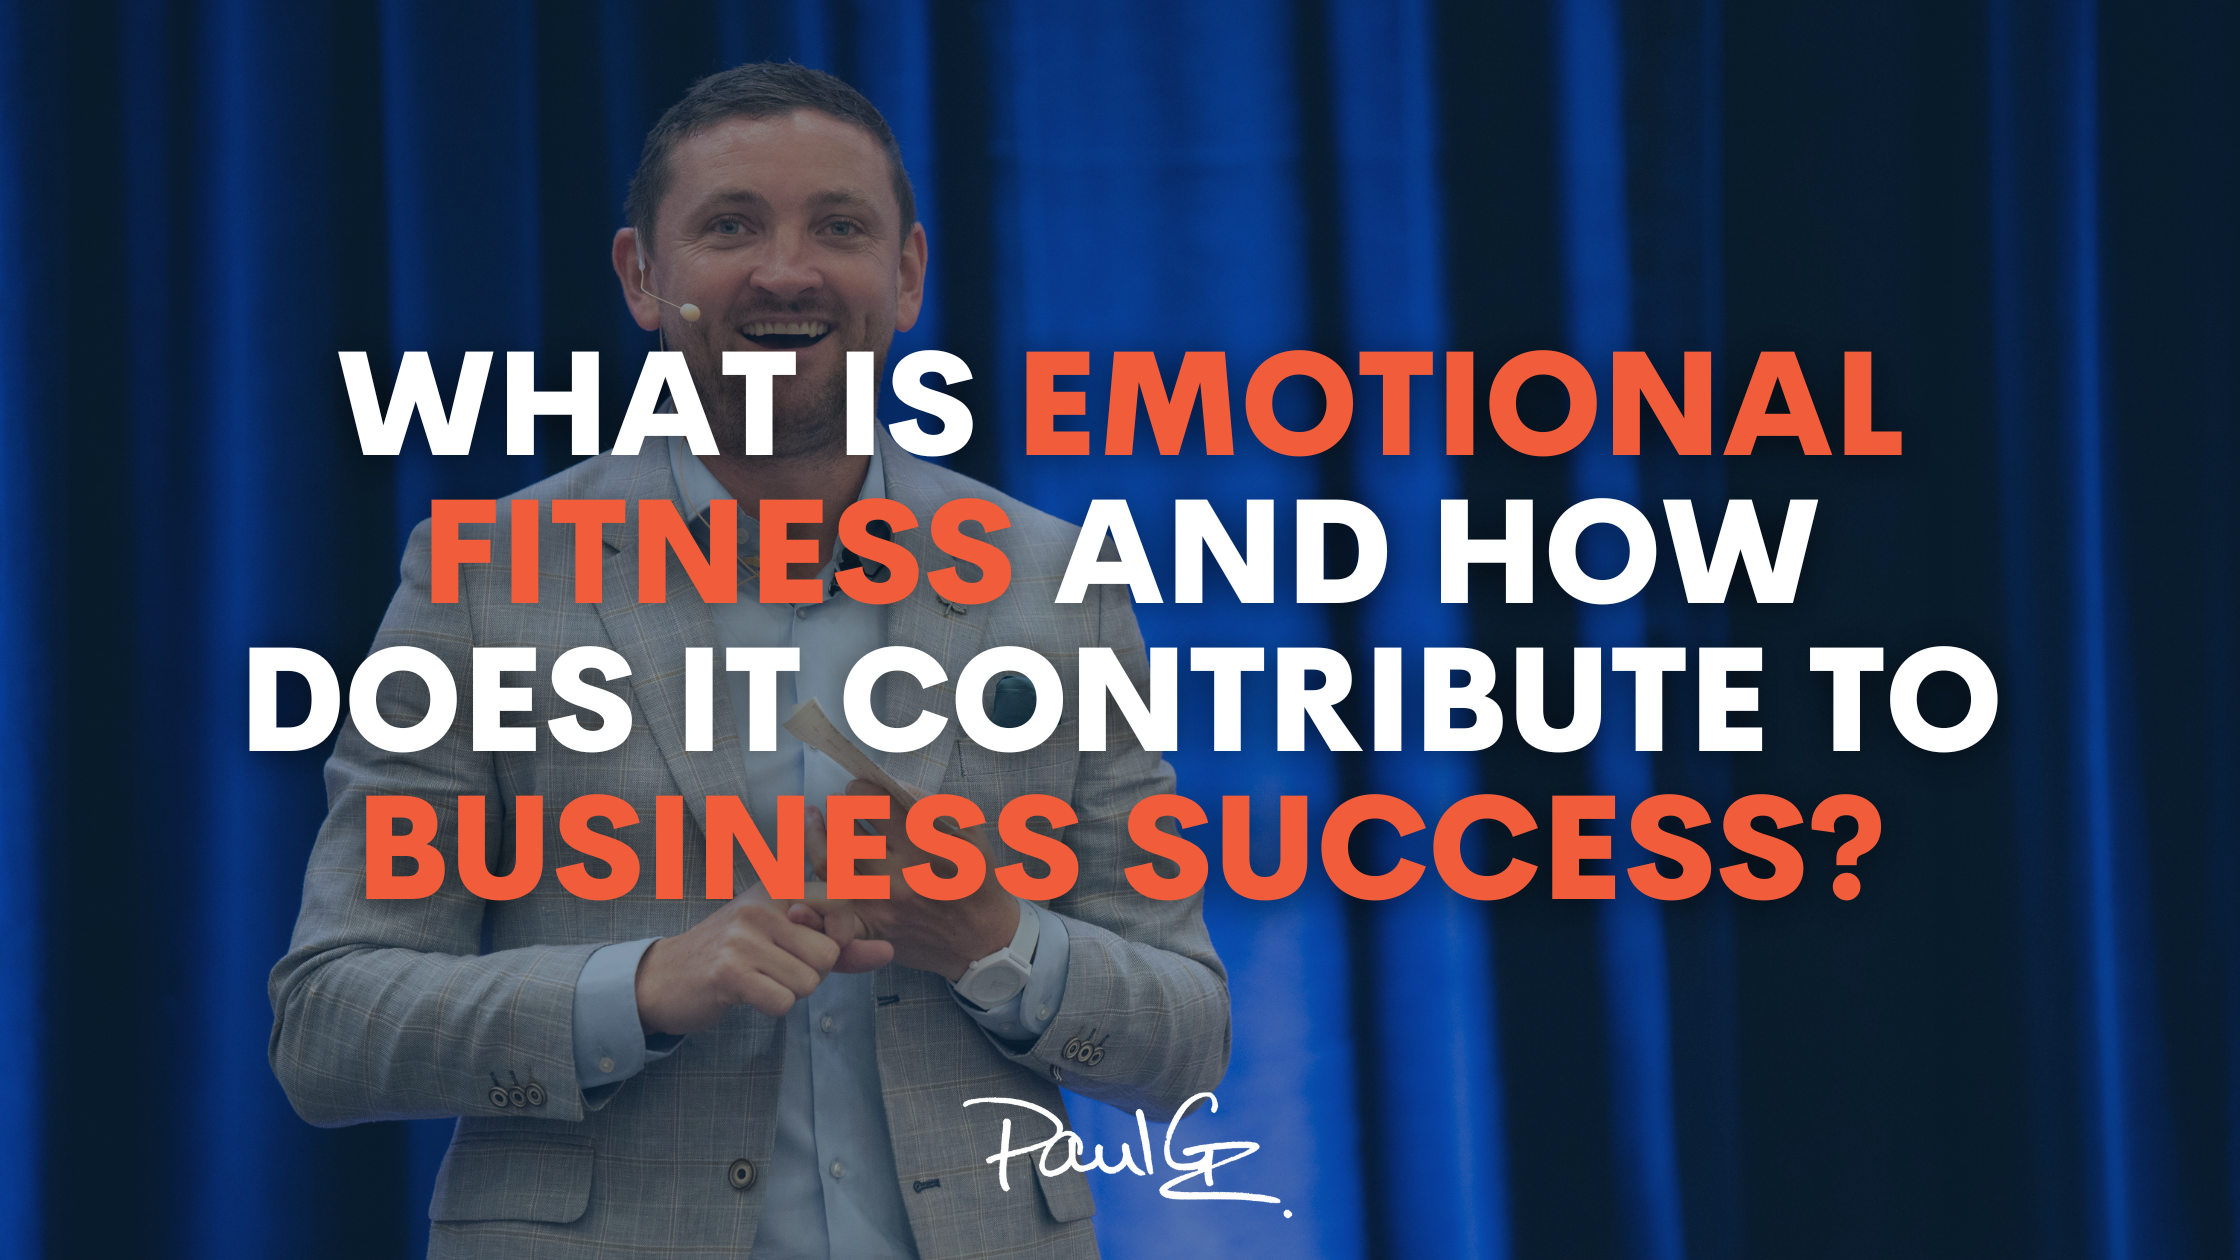 What Is Emotional Fitness And How Does It Contribute To Business Success?